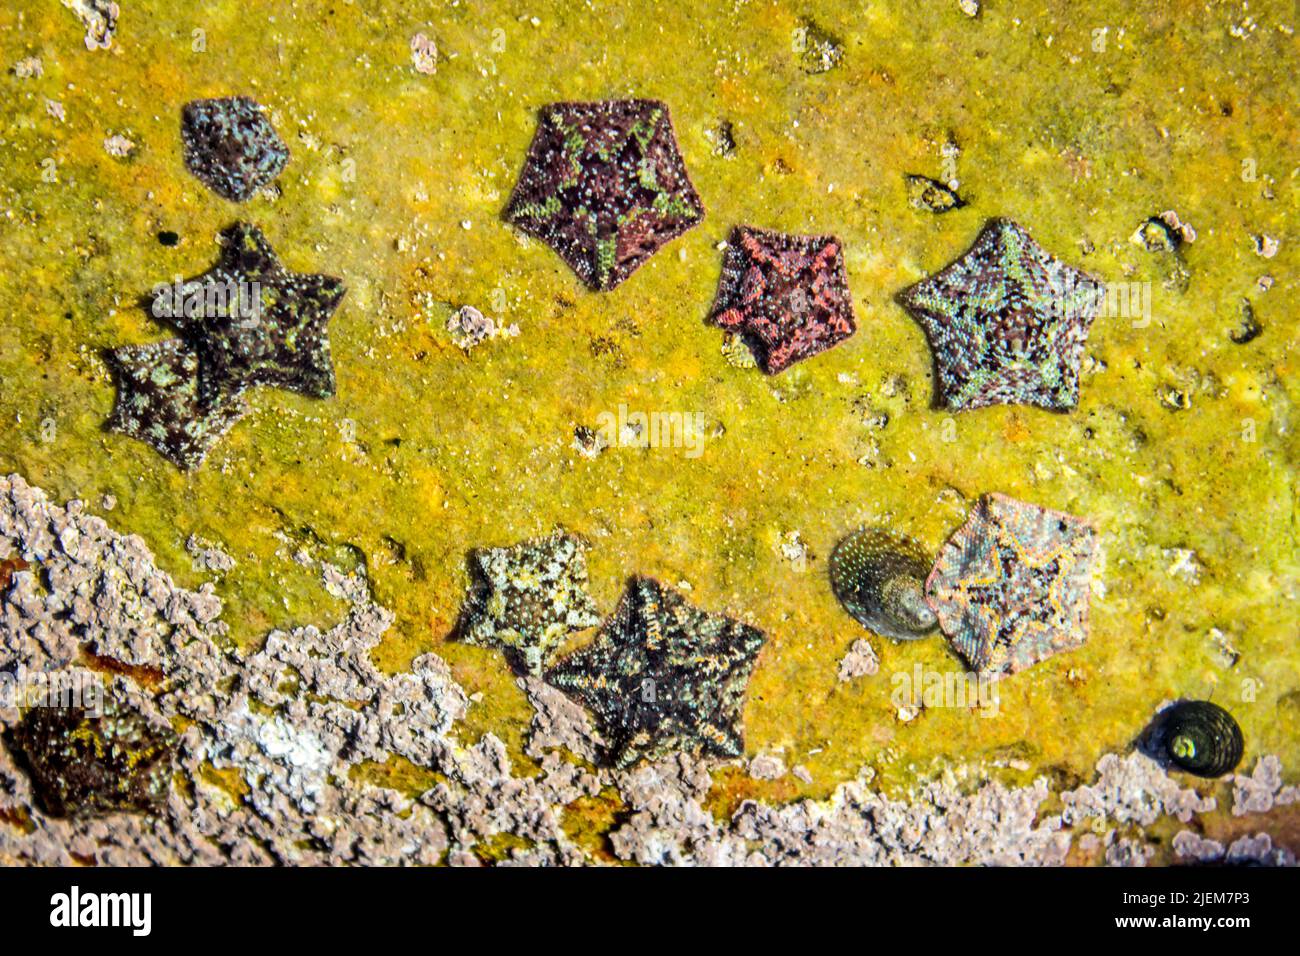 A group of various multi-colored small Dwarf cushion stars, Parvulastra, exigua, in a tidal pool along the Tsitsikamma coast of South Africa. Stock Photo